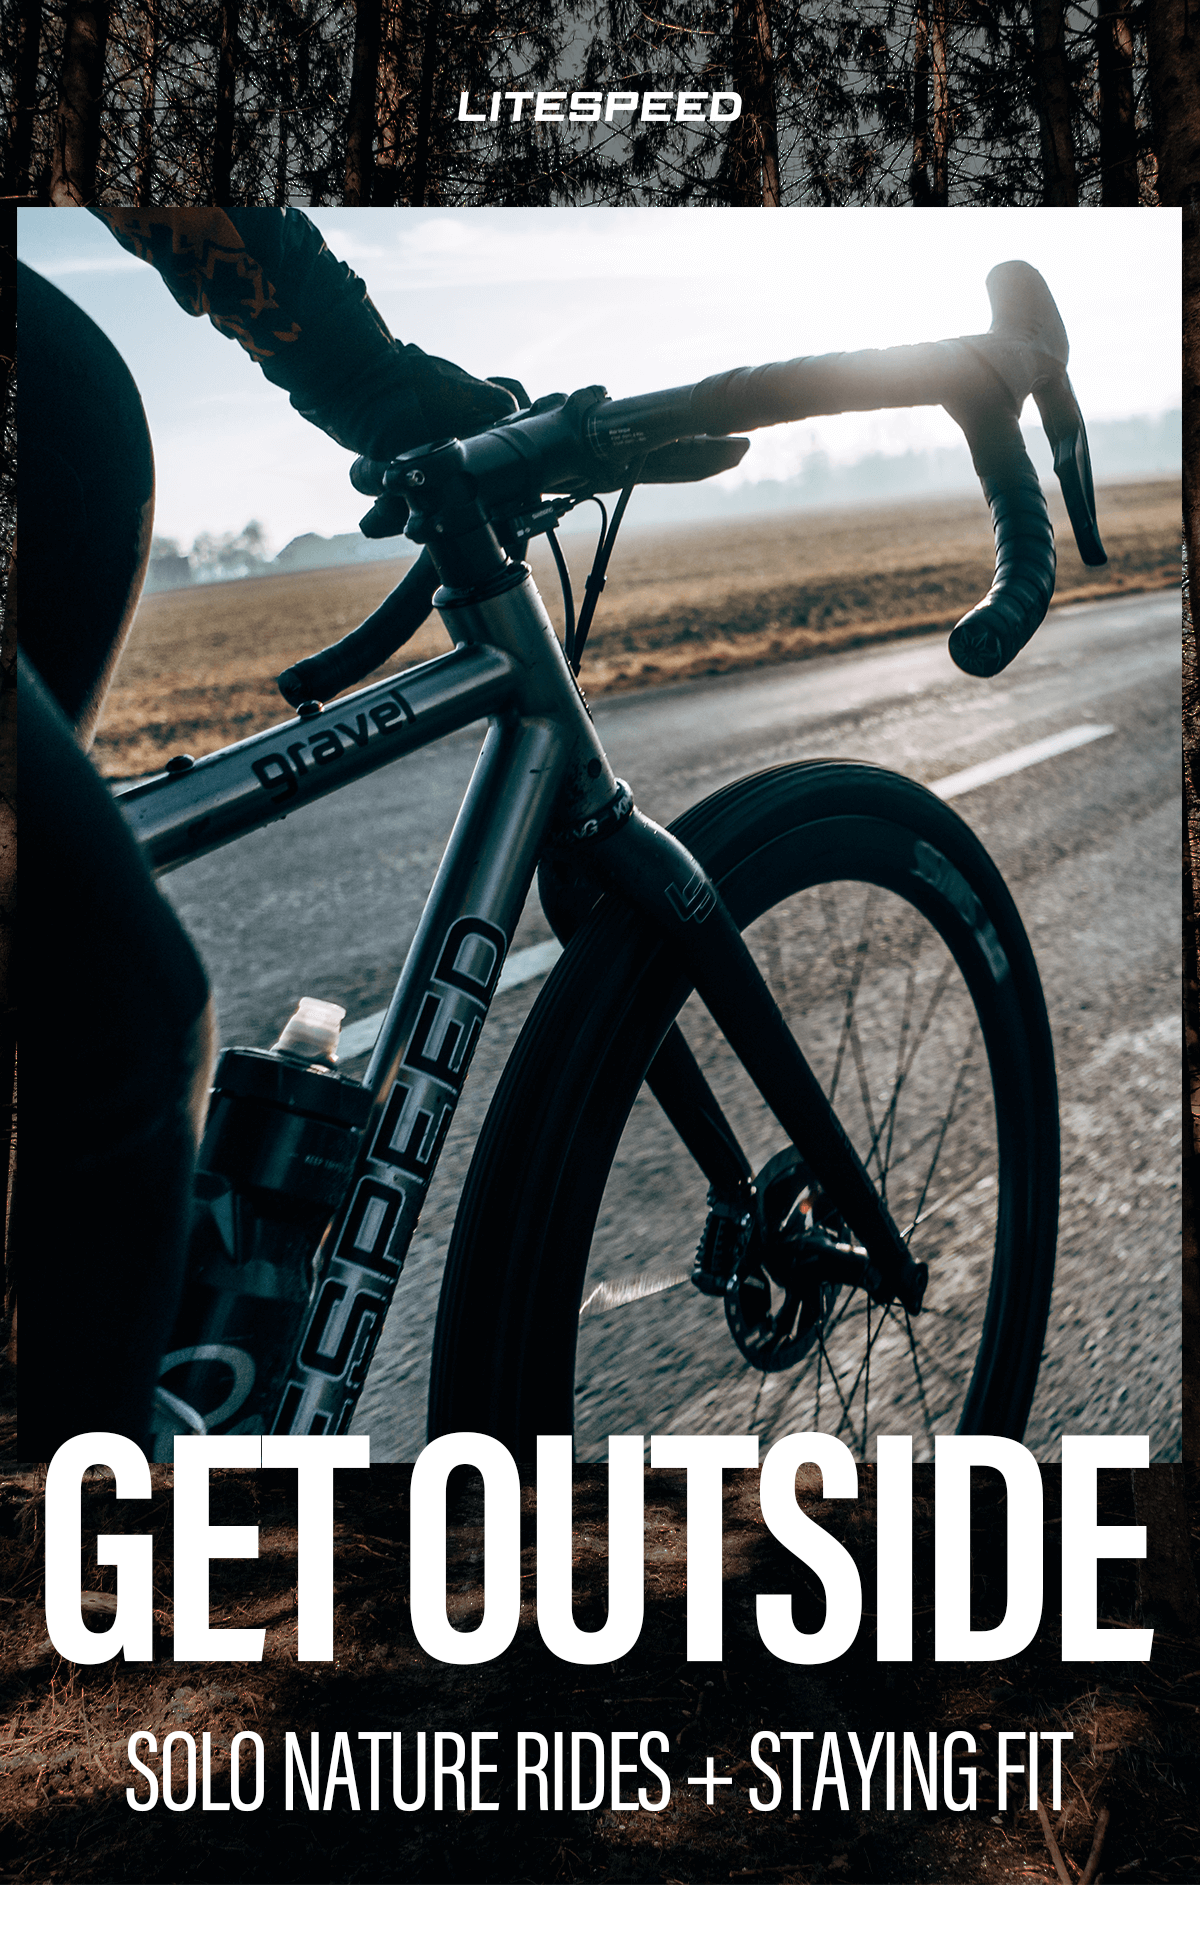 Get Outside: Staying fit on solo rides during Coronavirus lockdown.